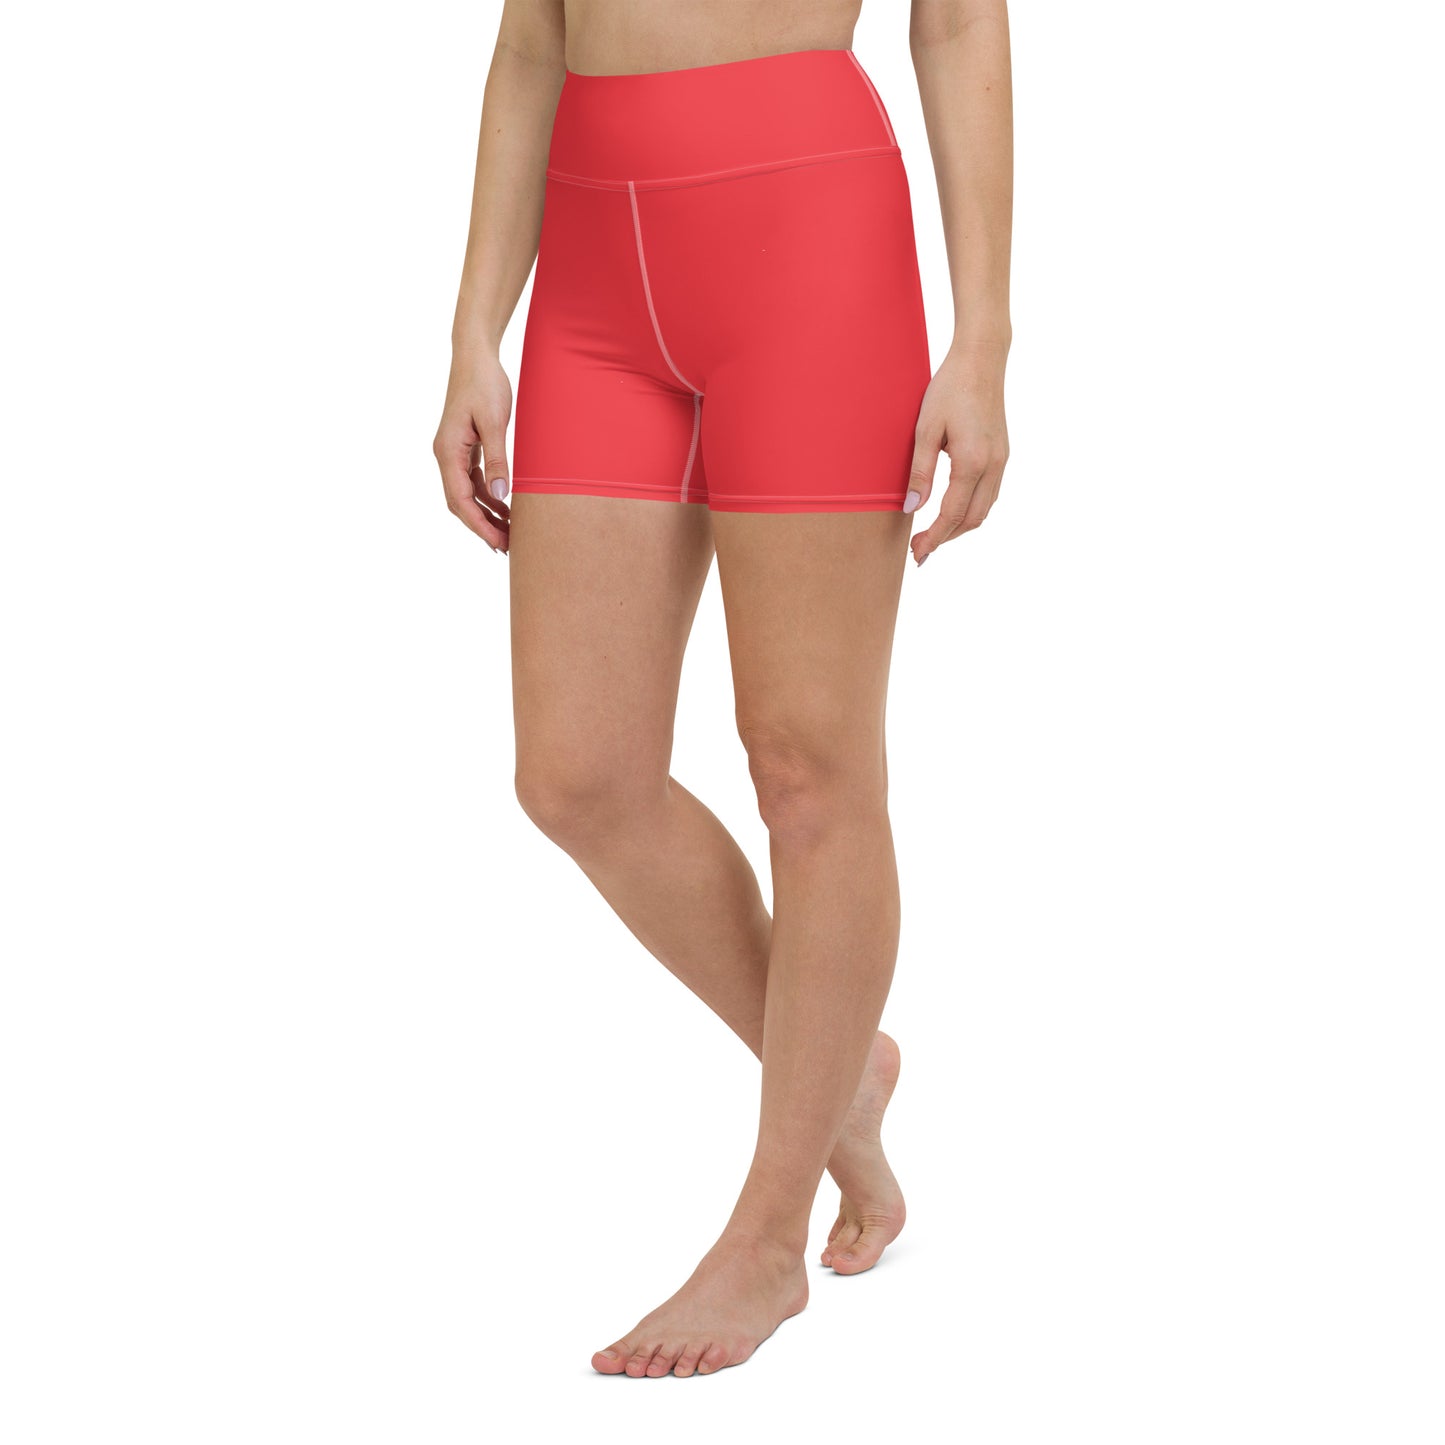 Nord Solid Red High Waist Yoga Shorts / Bike Shorts with Inside Pocket